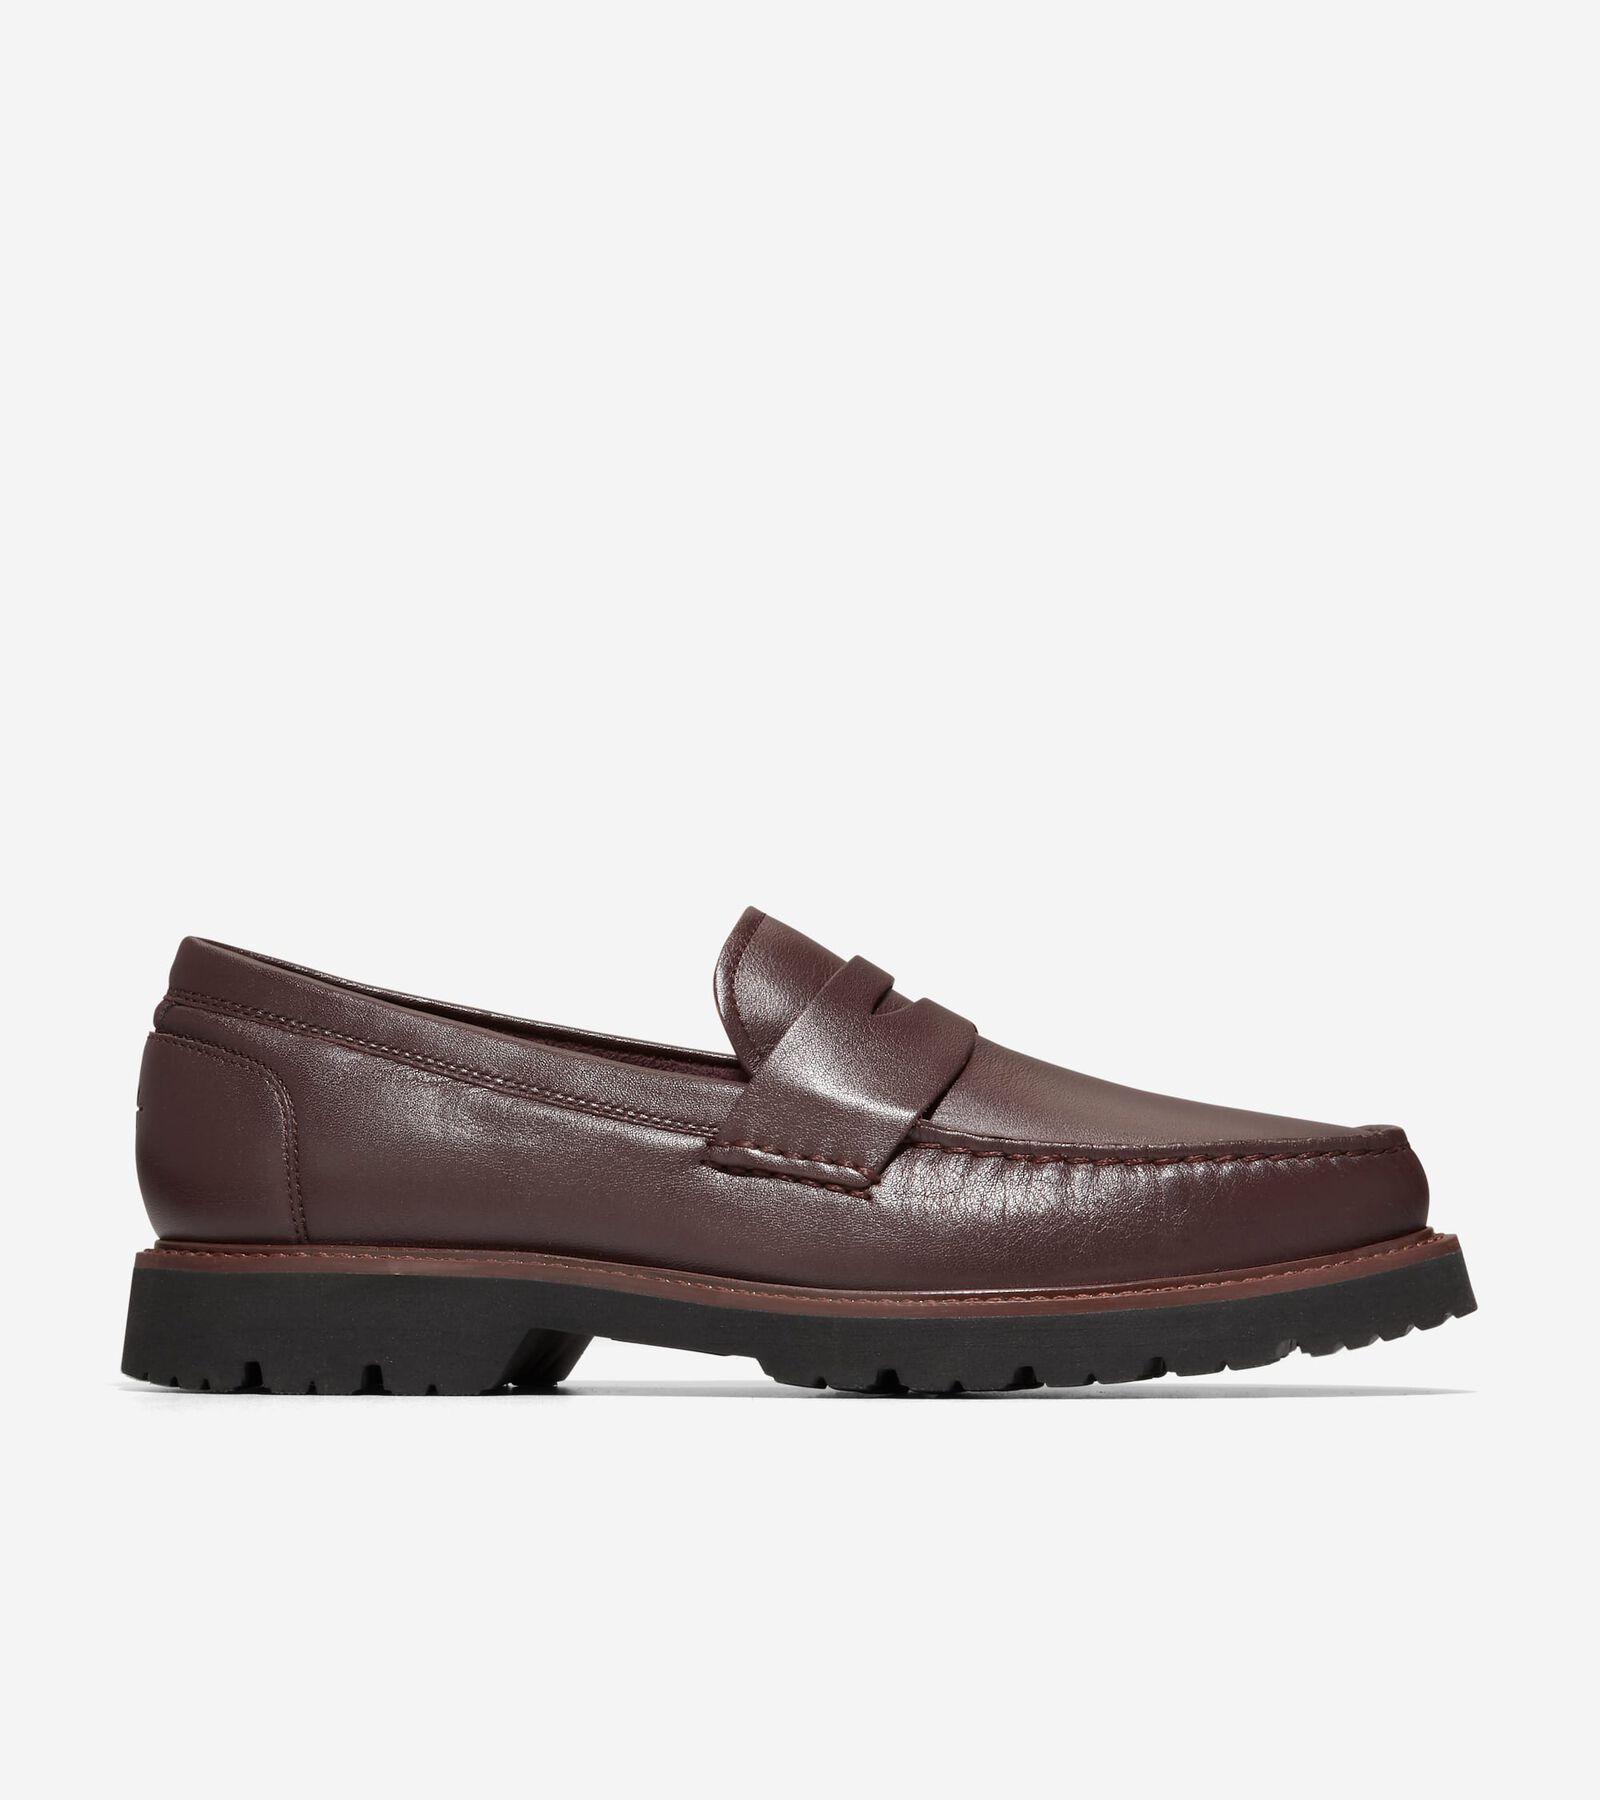 Cole Haan American Classics Penny Loafer Product Image